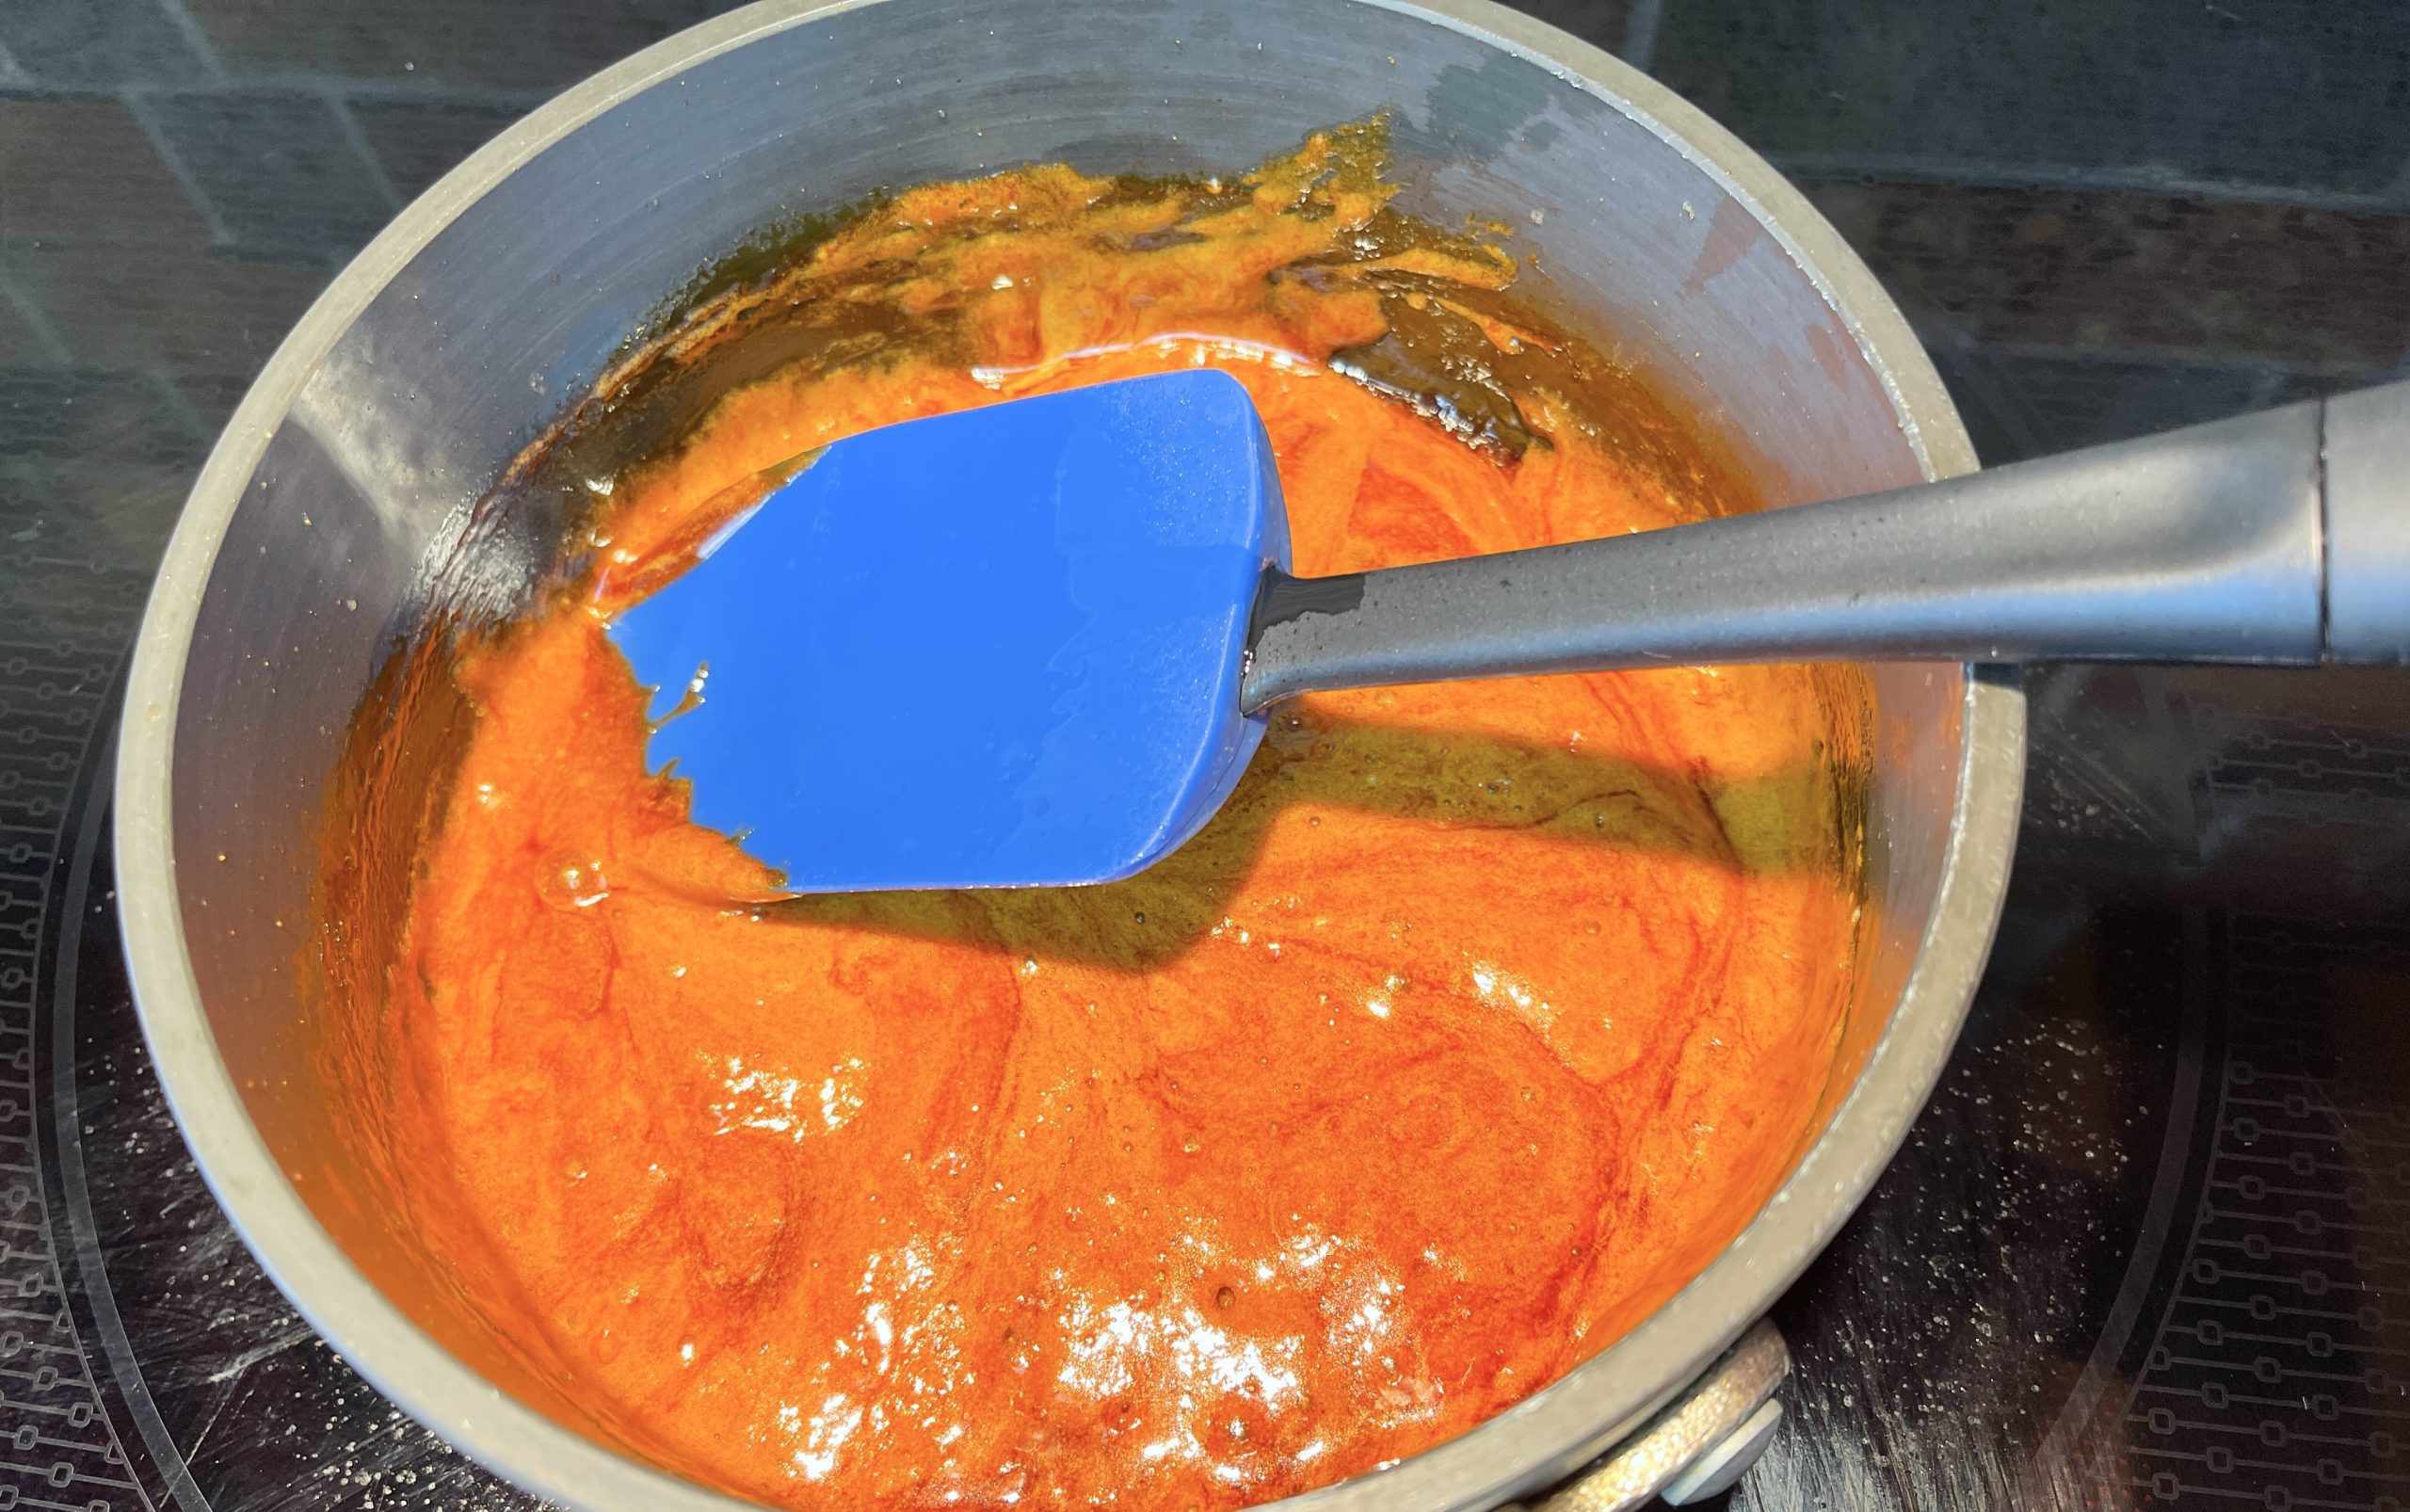 Mix salt and baking soda into the spicy caramel